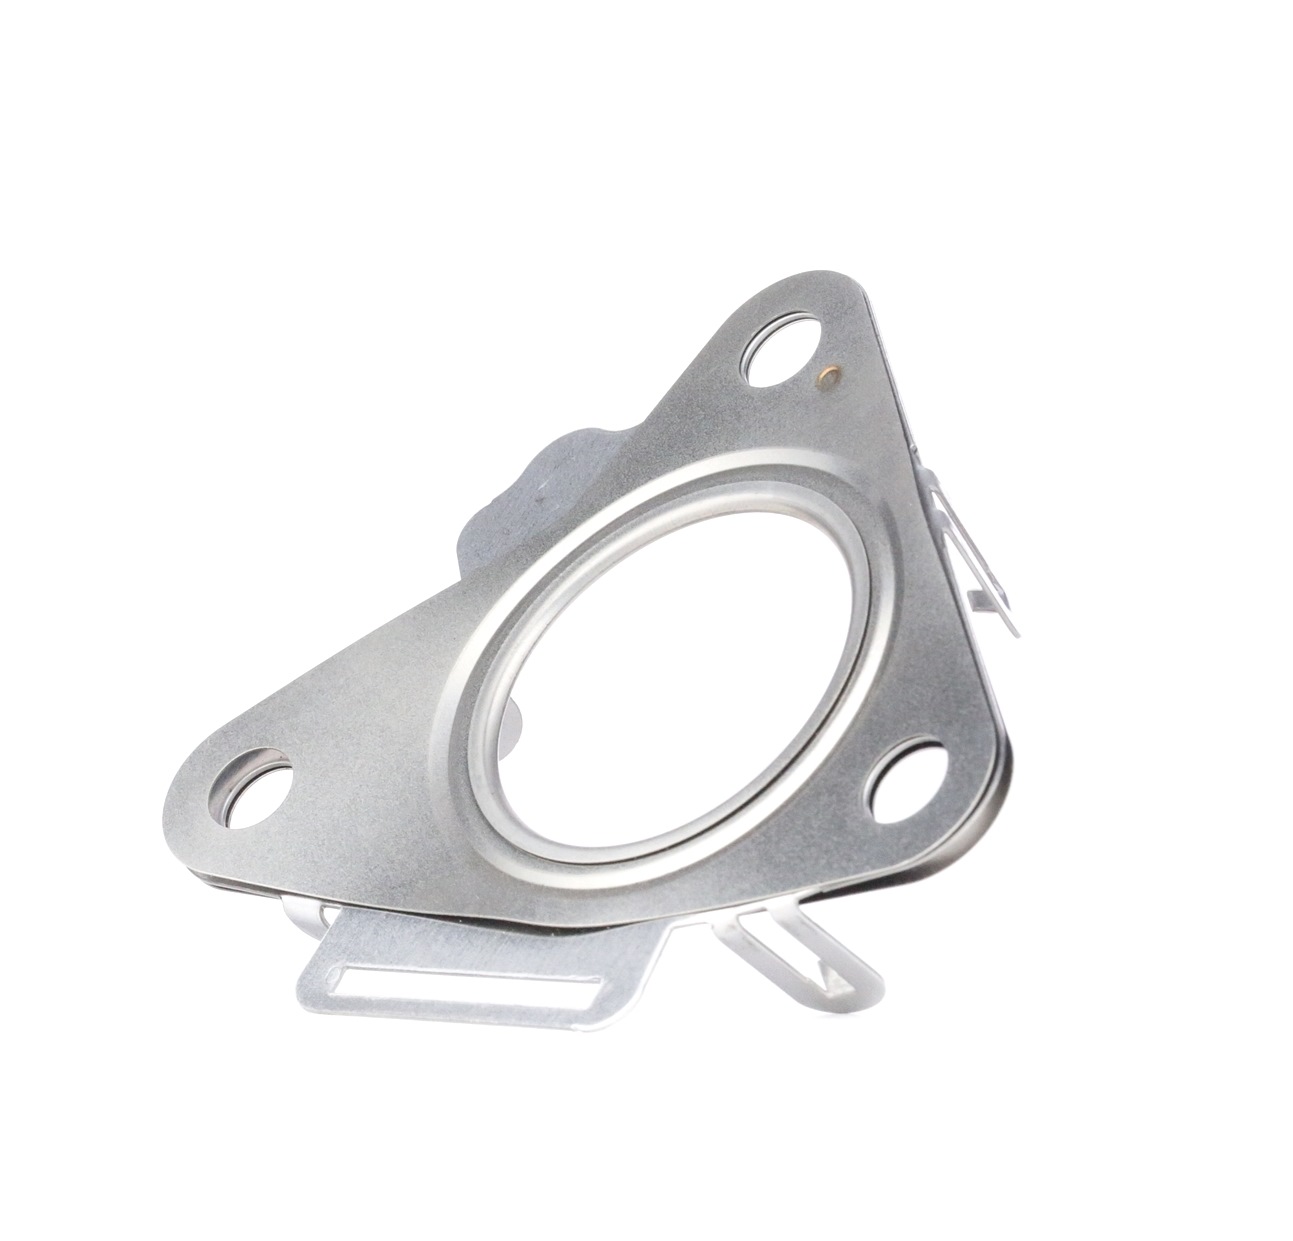 Buy Exhaust pipe gasket ELRING 255.170 - Exhaust system parts MERCEDES-BENZ X-Class online